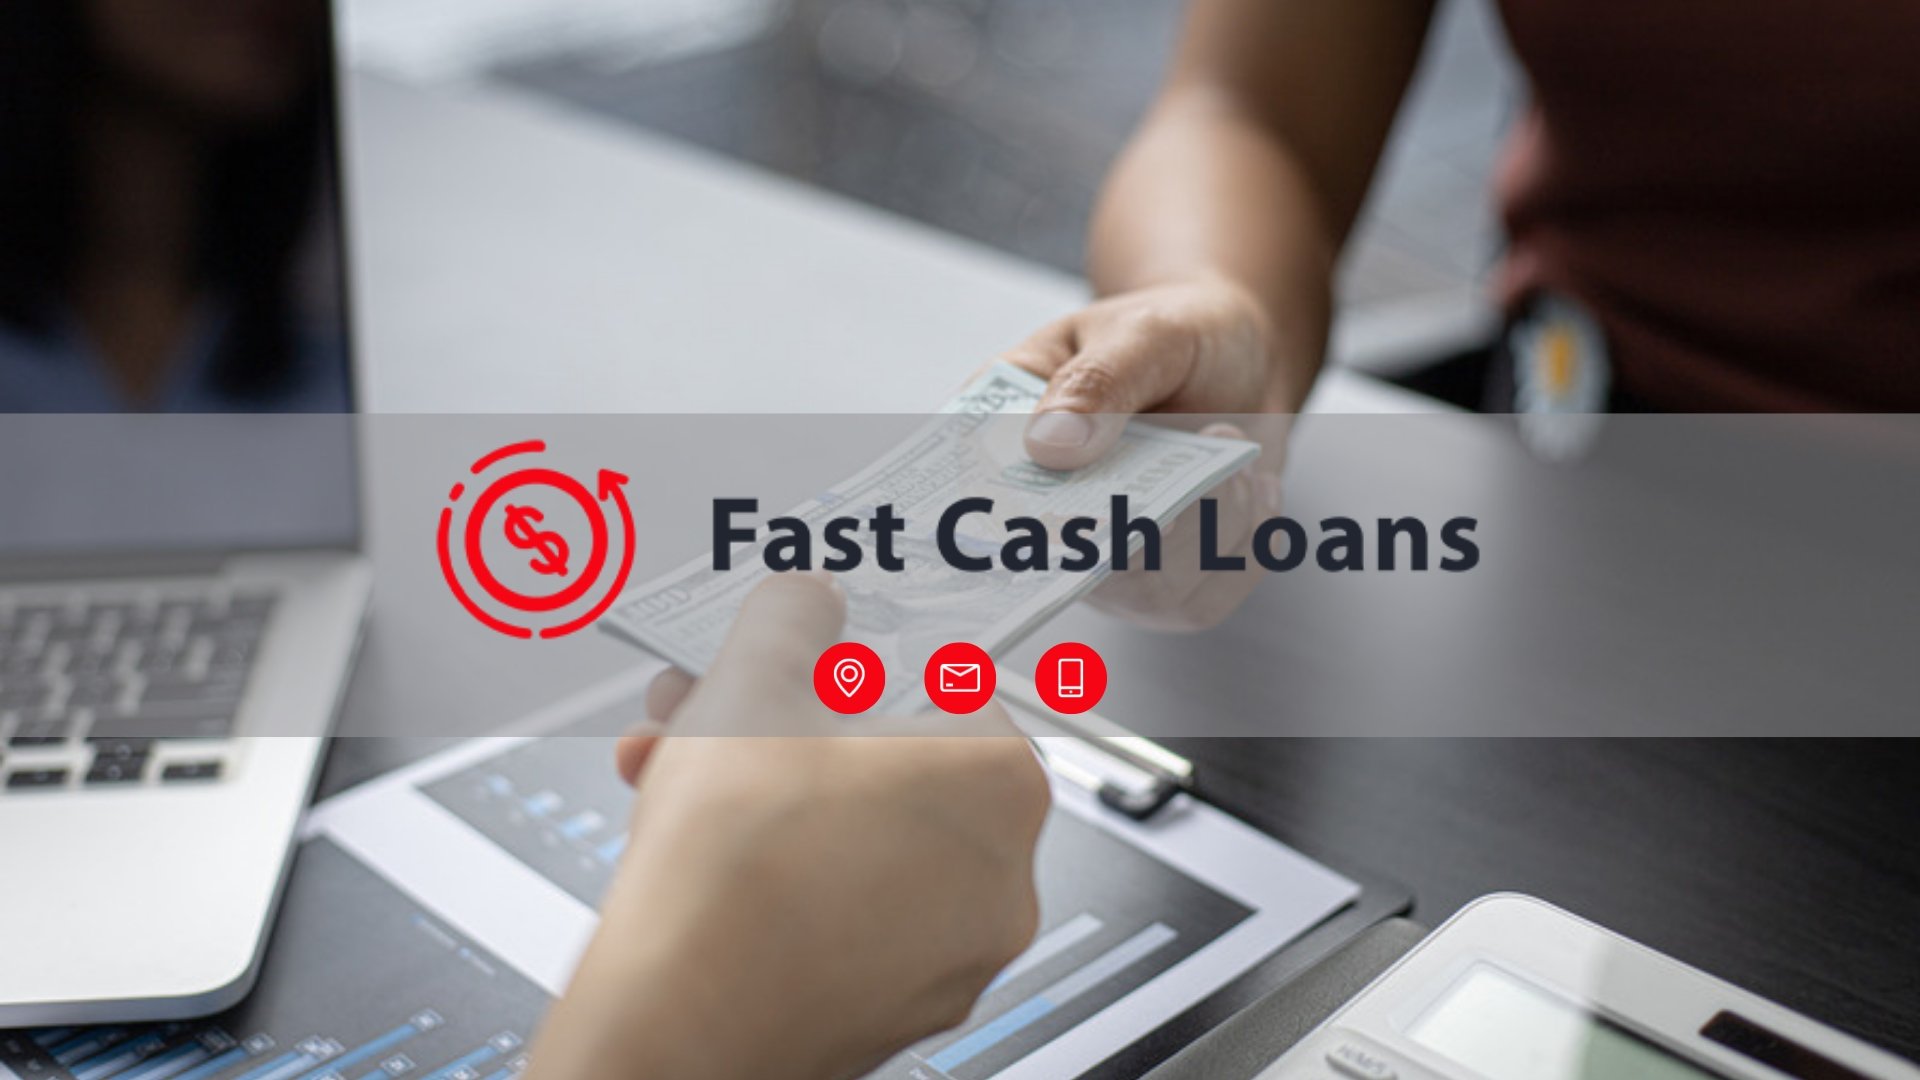 Fast Cash Loans cover